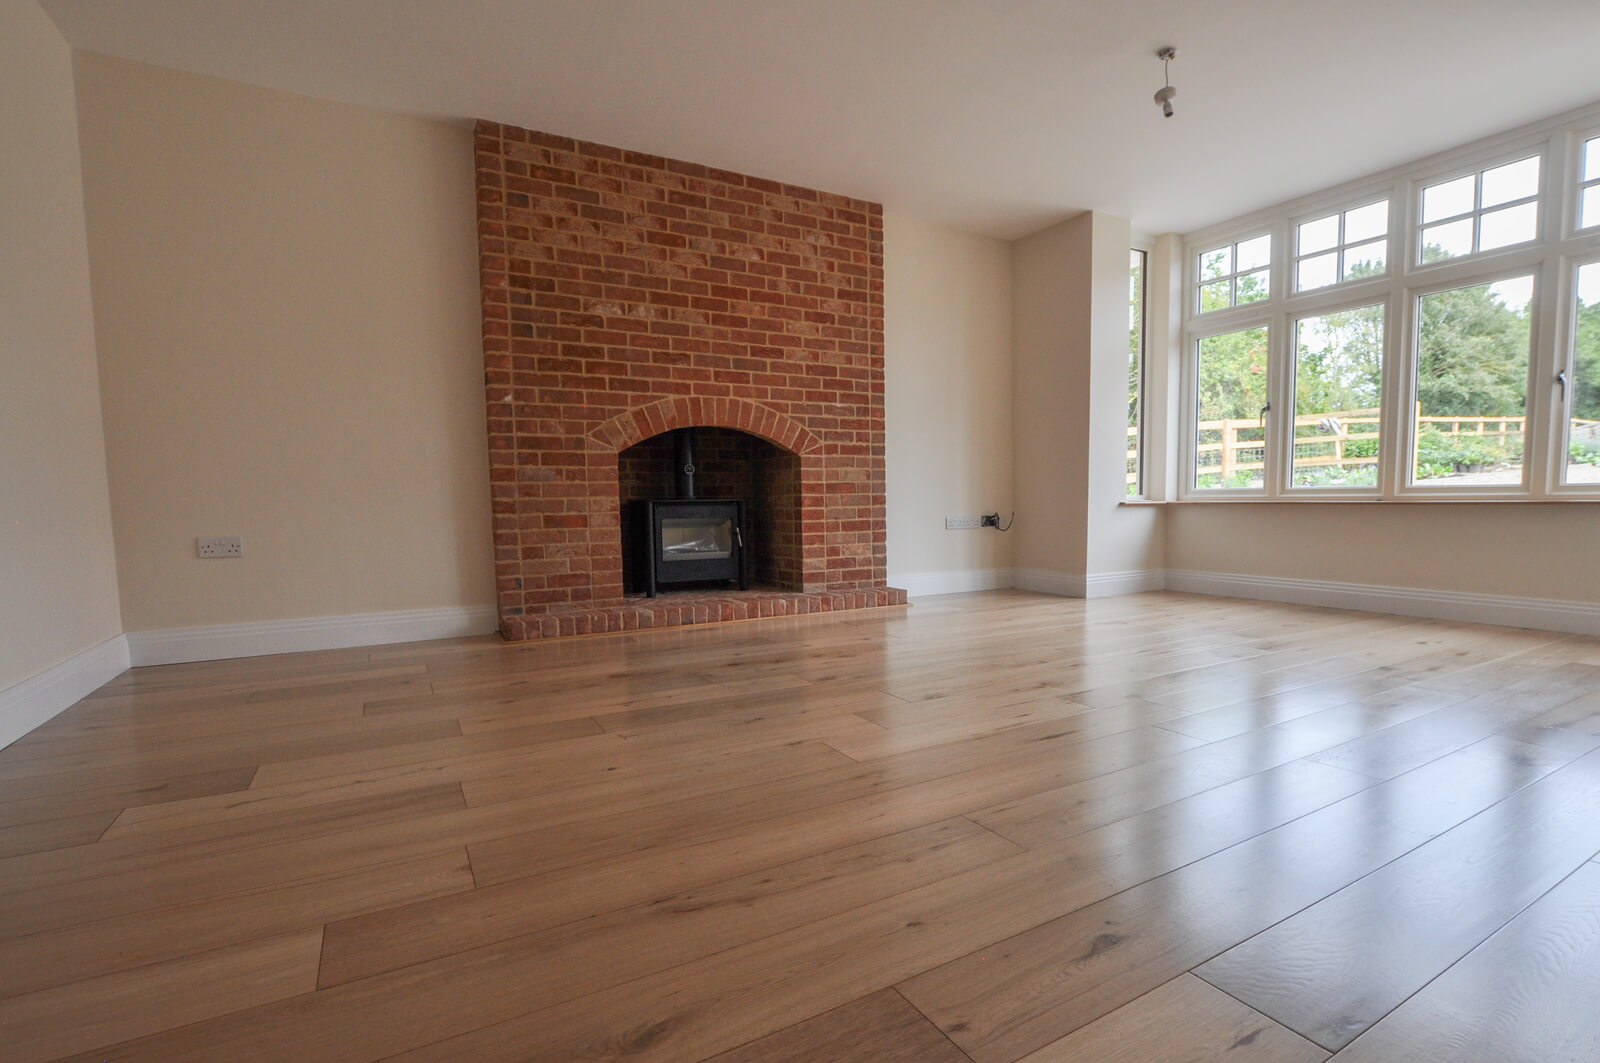 Living room with hard wood floor and large brick fire place.